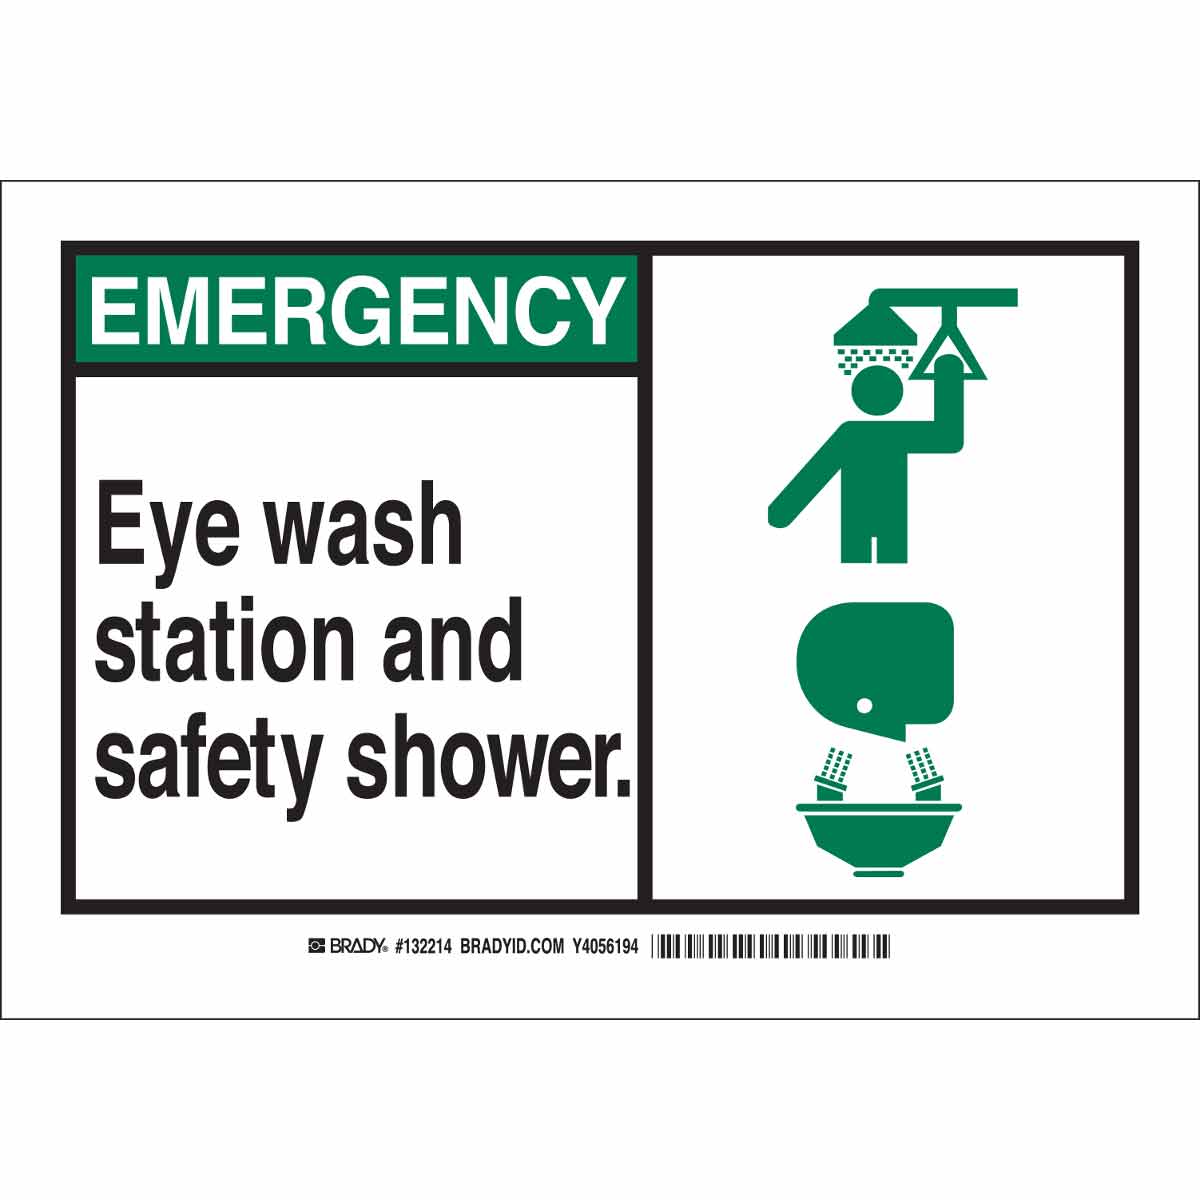 Black and Blue on White 10 Weight LegendEmergency Eye Wash 7 Height Brady 127392 First Aid Sign 